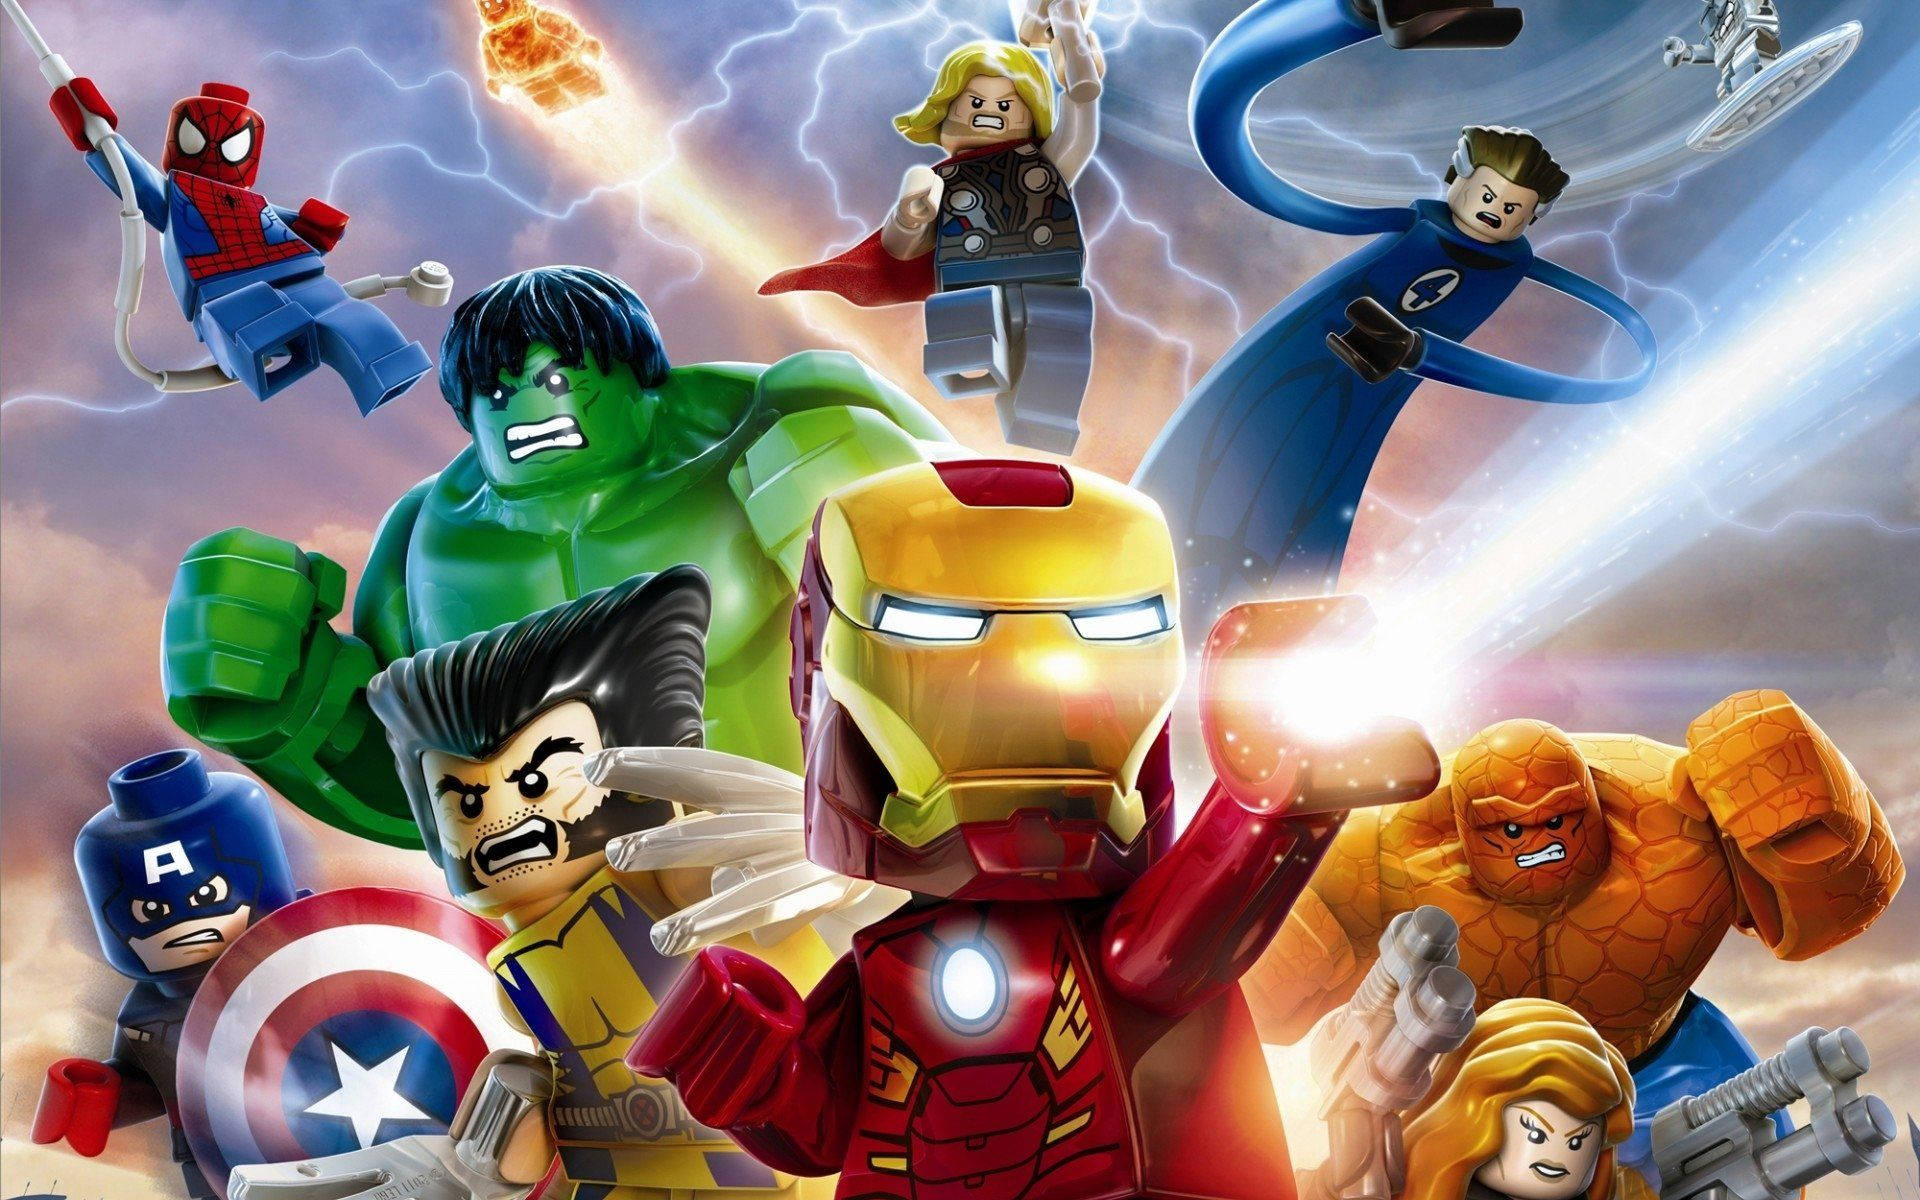 lego avengers ps4 download